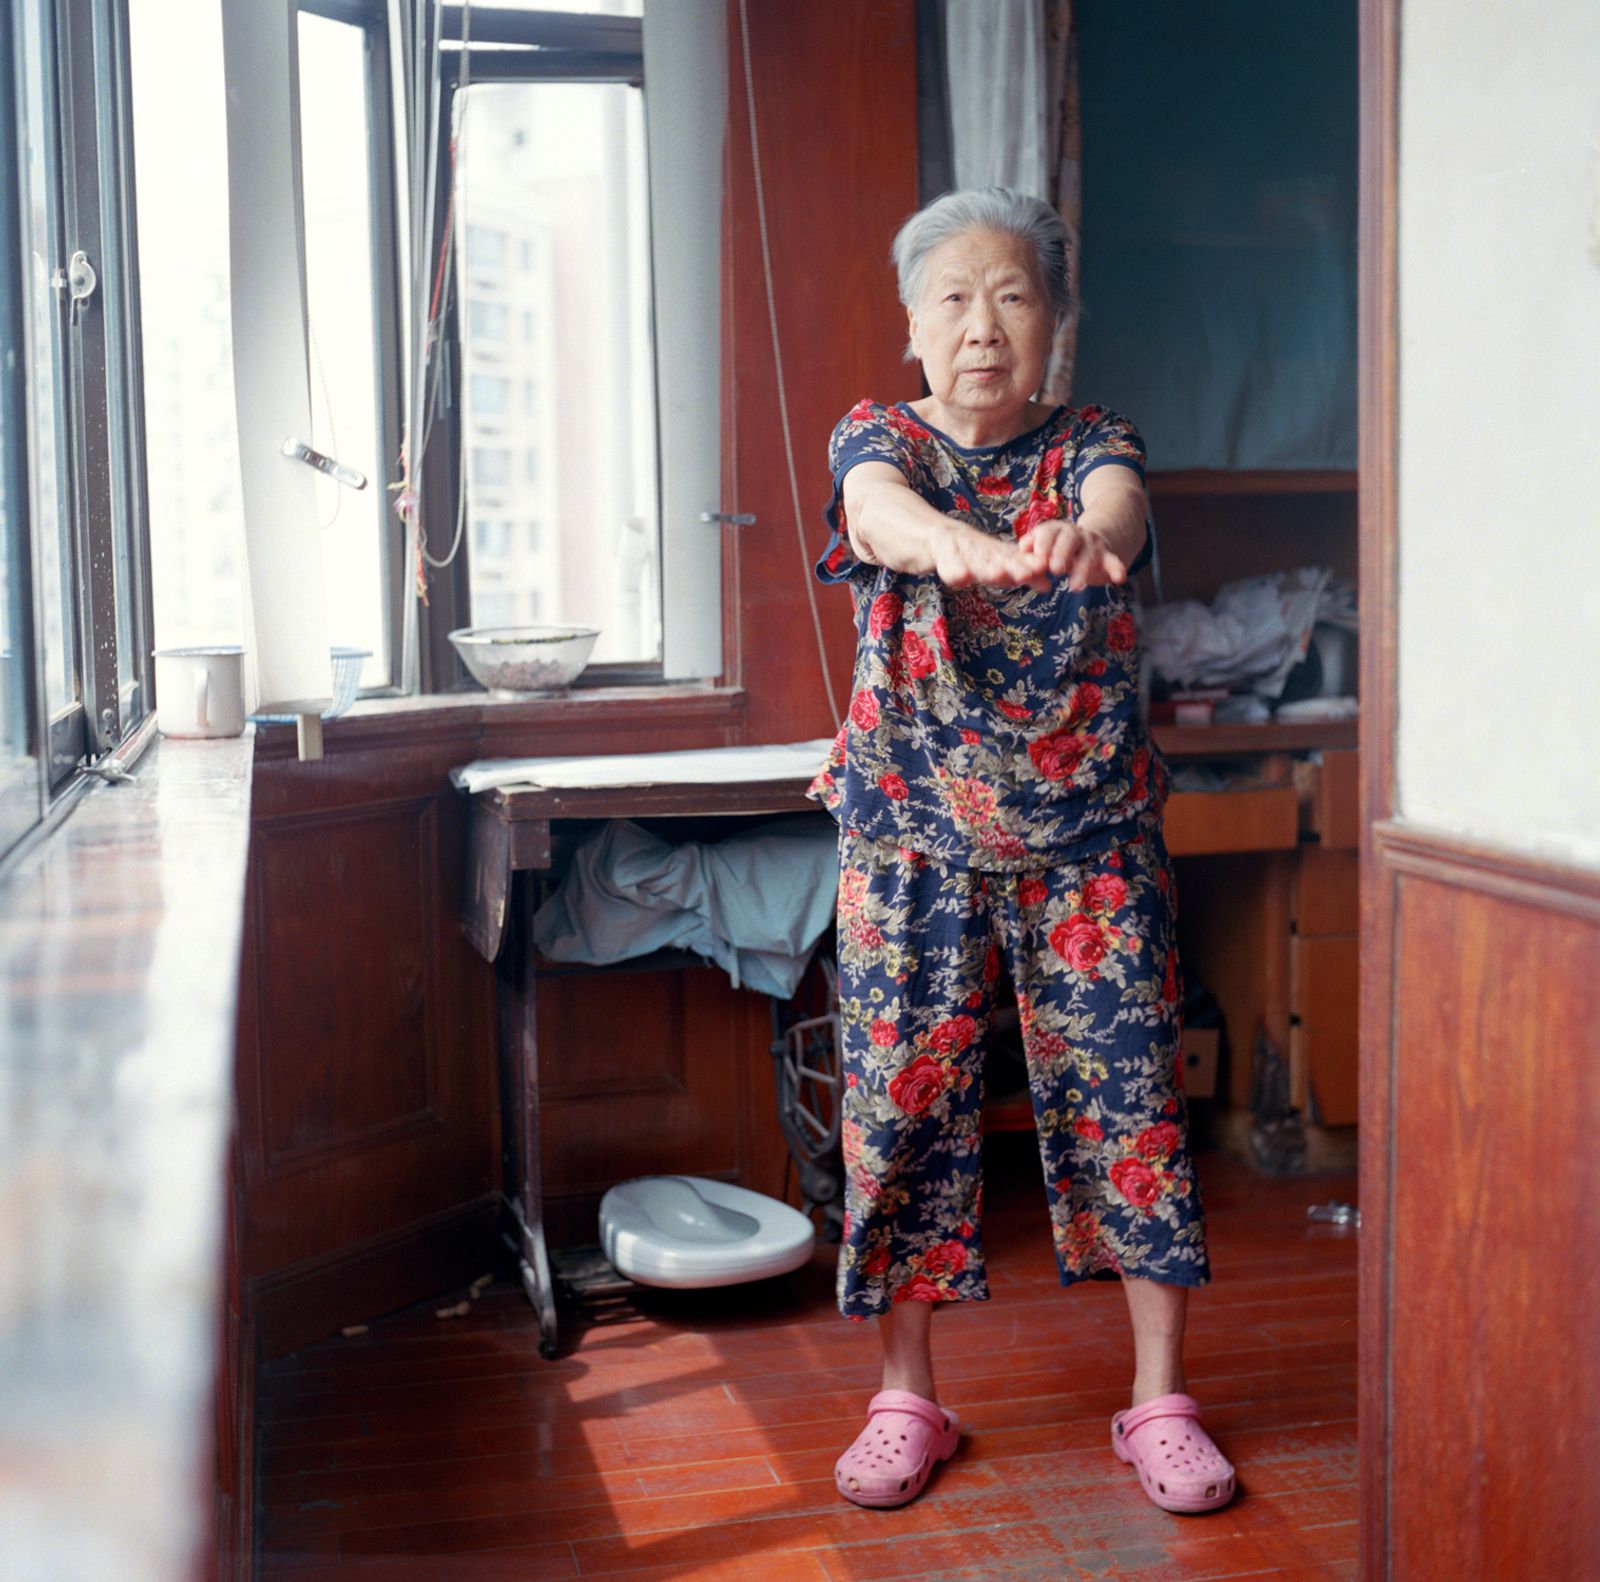 © Yang Zhou - Image from the How to Grow Old photography project